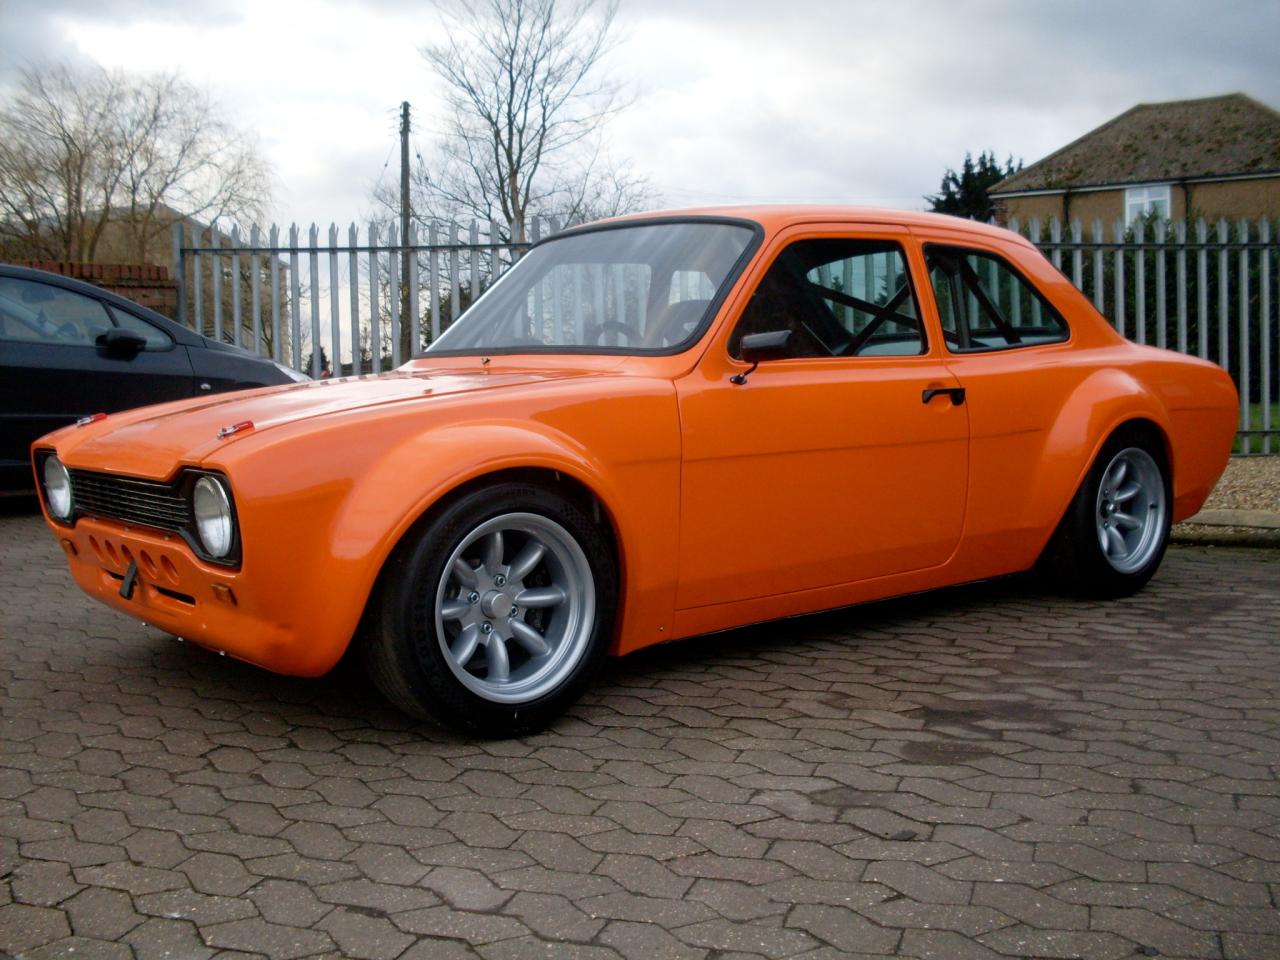 Mk1 escort who's owned a sporty one and what was it like